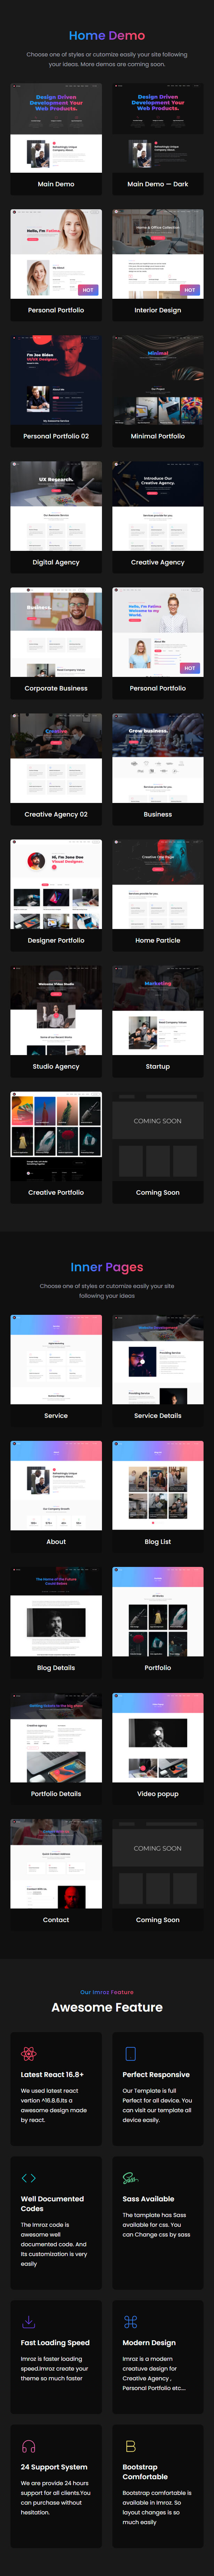 Imroz - Creative Agency and Portfolio Bootstrap Template - 7